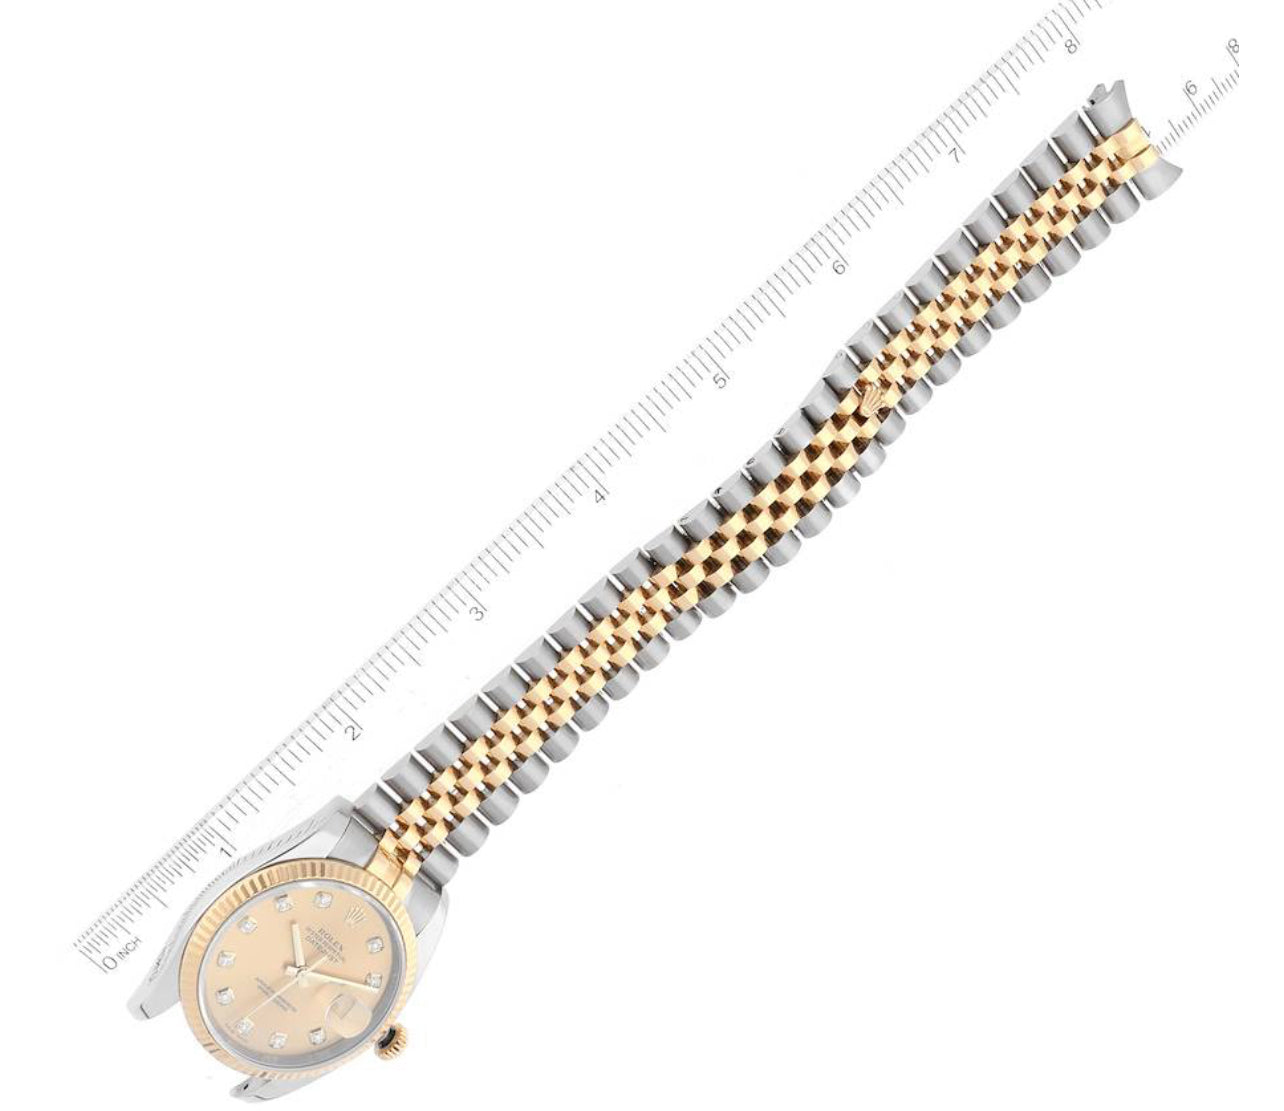 Rolex Datejust Steel Yellow Gold Champagne Diamond Dial Mens Watch 116233